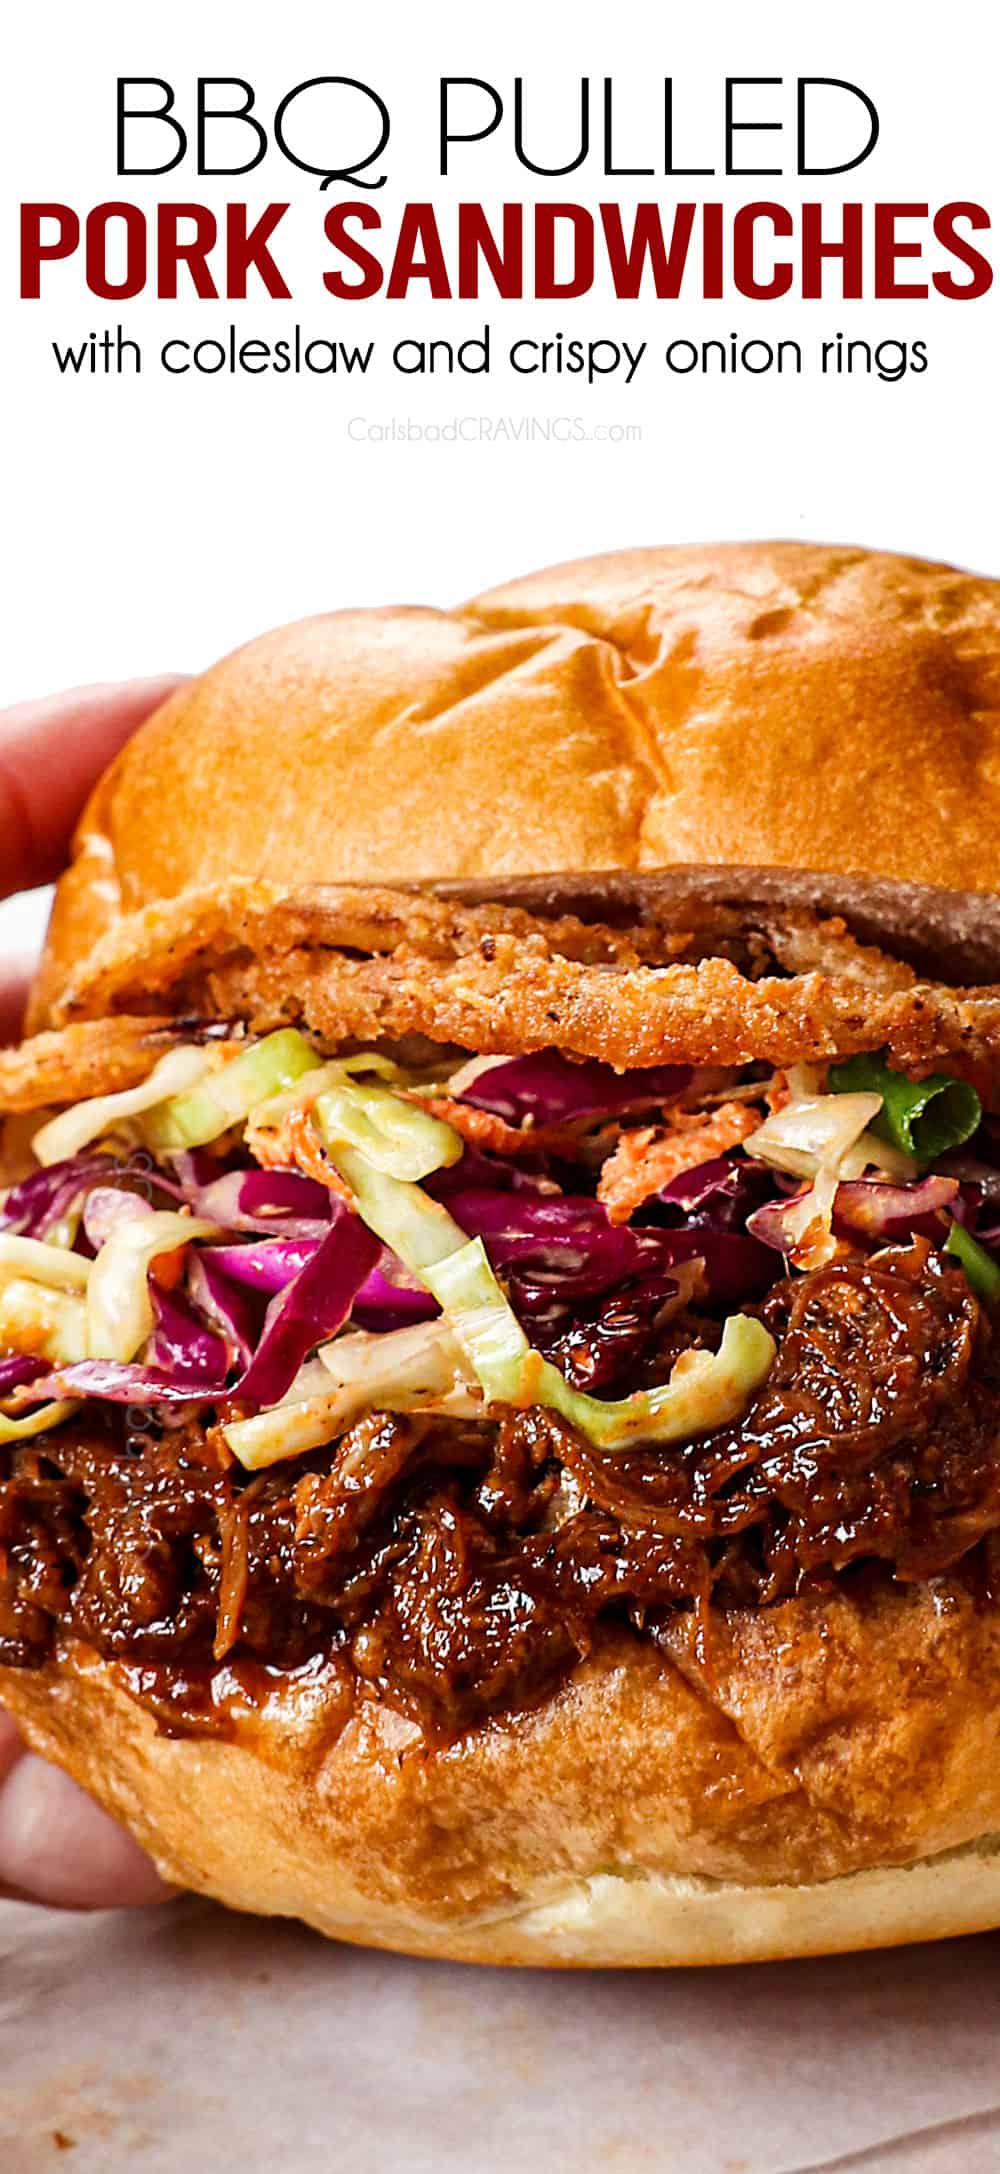 up close of pulled pork sandwiches with bbq sauce showing how juicy they are